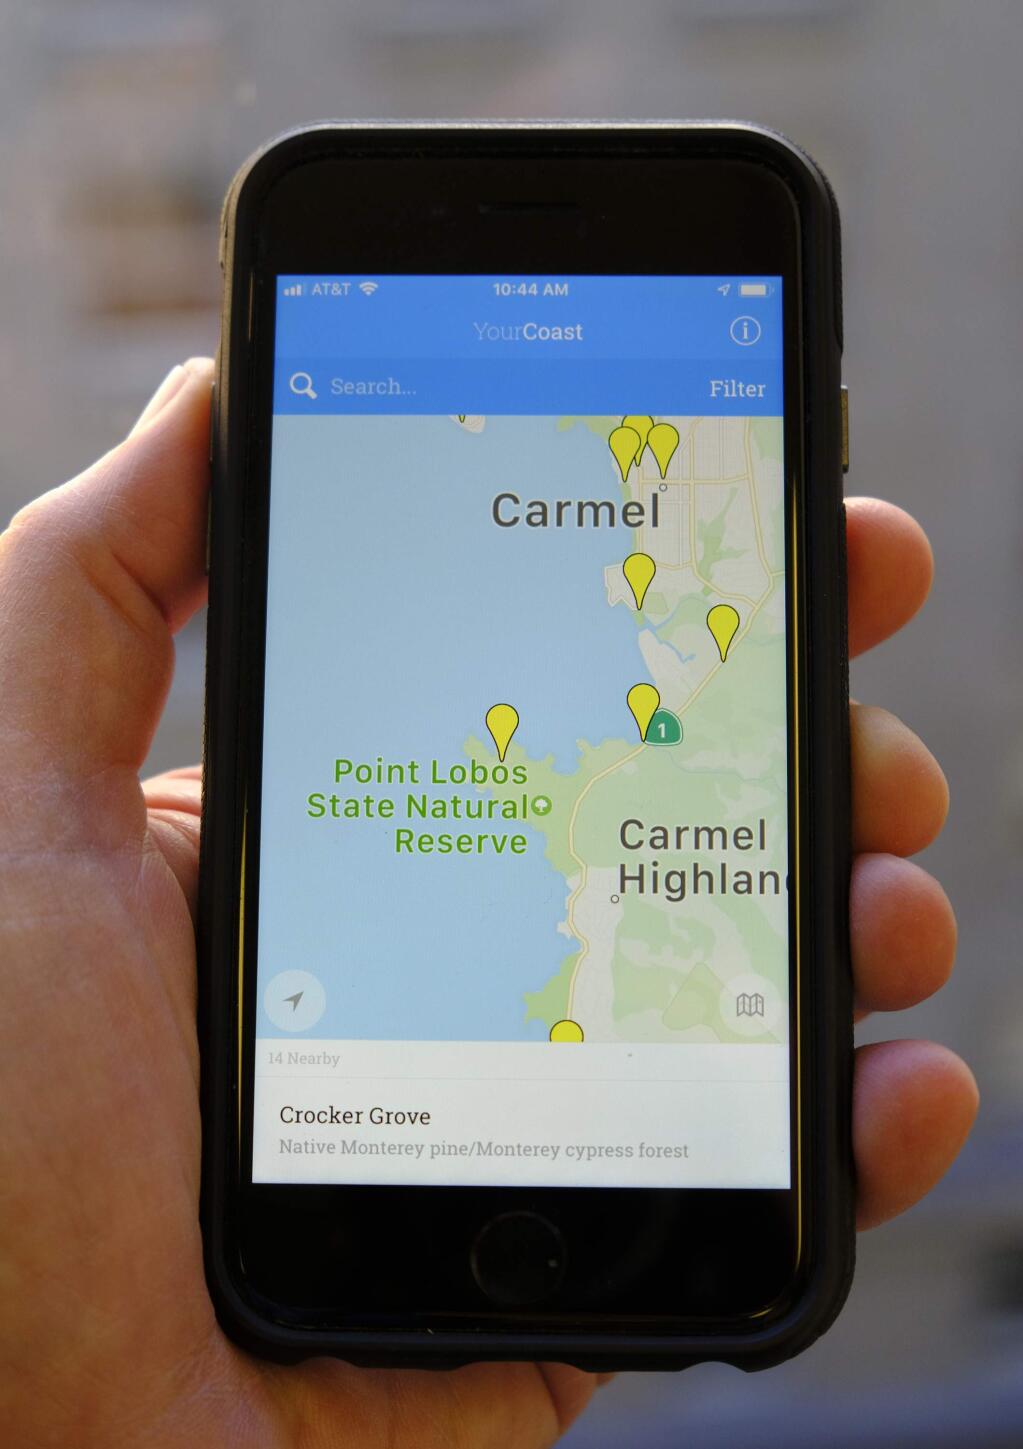 The new YourCoast app is displayed on a smartphone Thursday, Dec. 13, 2018, in San Francisco. The new smartphone app that shows users a map of more than 1,500 access points along the California coast was created with help from a tech billionaire whose elaborate wedding ran afoul of state regulators. The California Coastal Commission is unveiling the YourCoast app Thursday. (AP Photo/Eric Risberg)